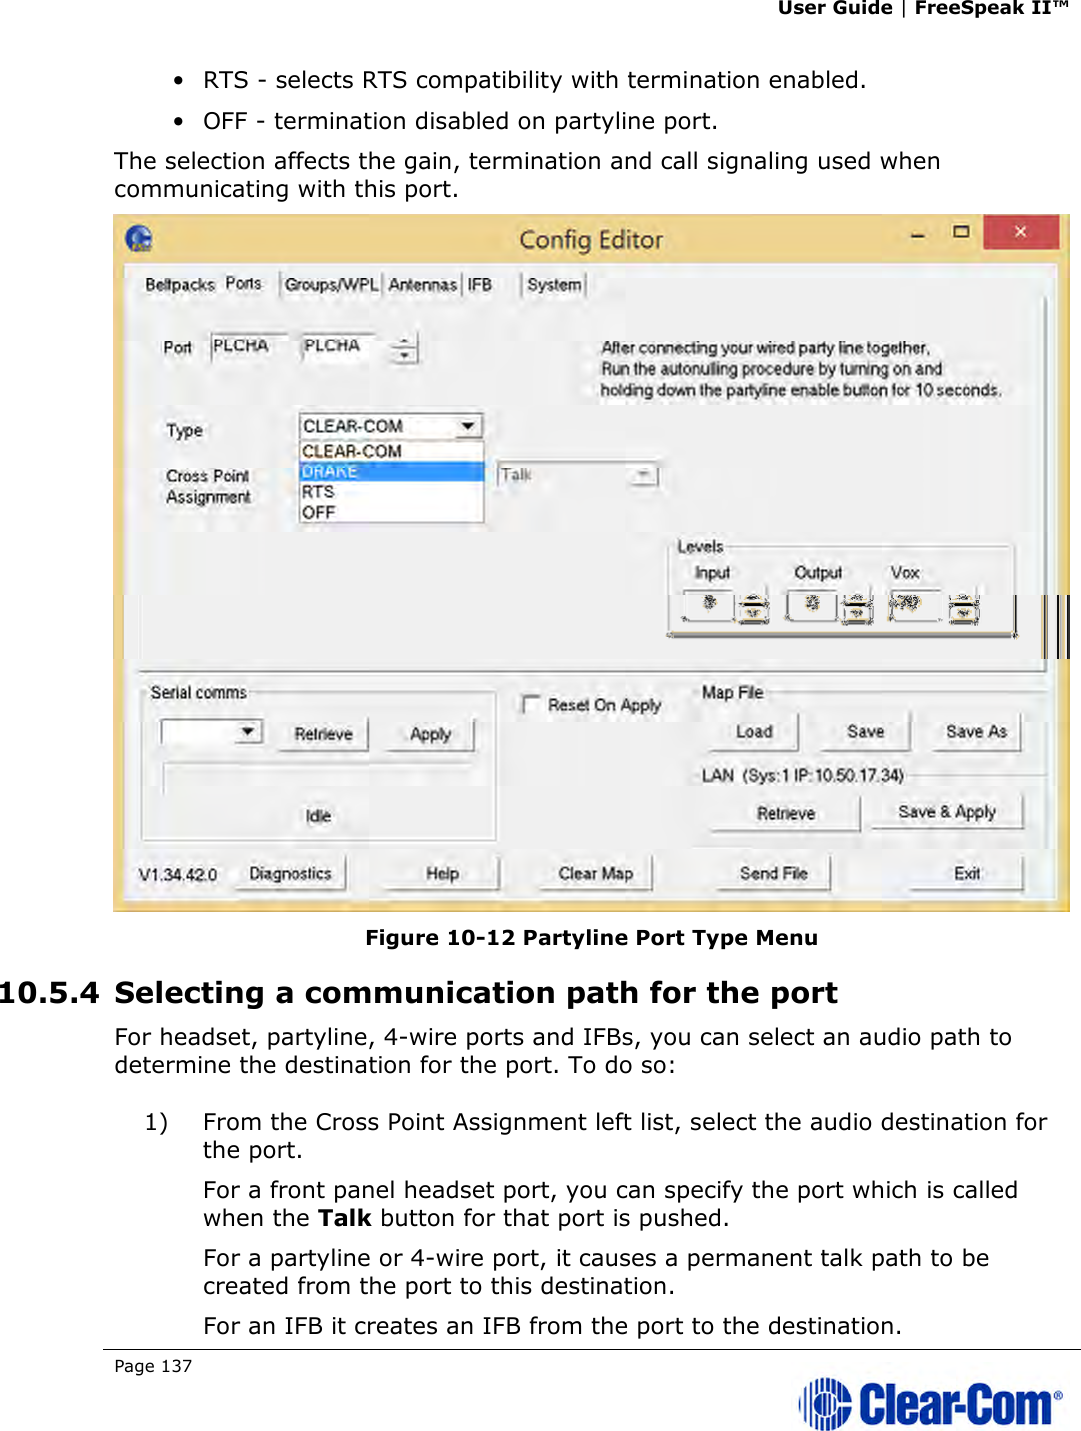 User Guide | FreeSpeak II™  Page 137   • RTS - selects RTS compatibility with termination enabled. • OFF - termination disabled on partyline port. The selection affects the gain, termination and call signaling used when communicating with this port.  Figure 10-12 Partyline Port Type Menu 10.5.4 Selecting a communication path for the port For headset, partyline, 4-wire ports and IFBs, you can select an audio path to determine the destination for the port. To do so: 1) From the Cross Point Assignment left list, select the audio destination for the port. For a front panel headset port, you can specify the port which is called when the Talk button for that port is pushed. For a partyline or 4-wire port, it causes a permanent talk path to be created from the port to this destination. For an IFB it creates an IFB from the port to the destination. 